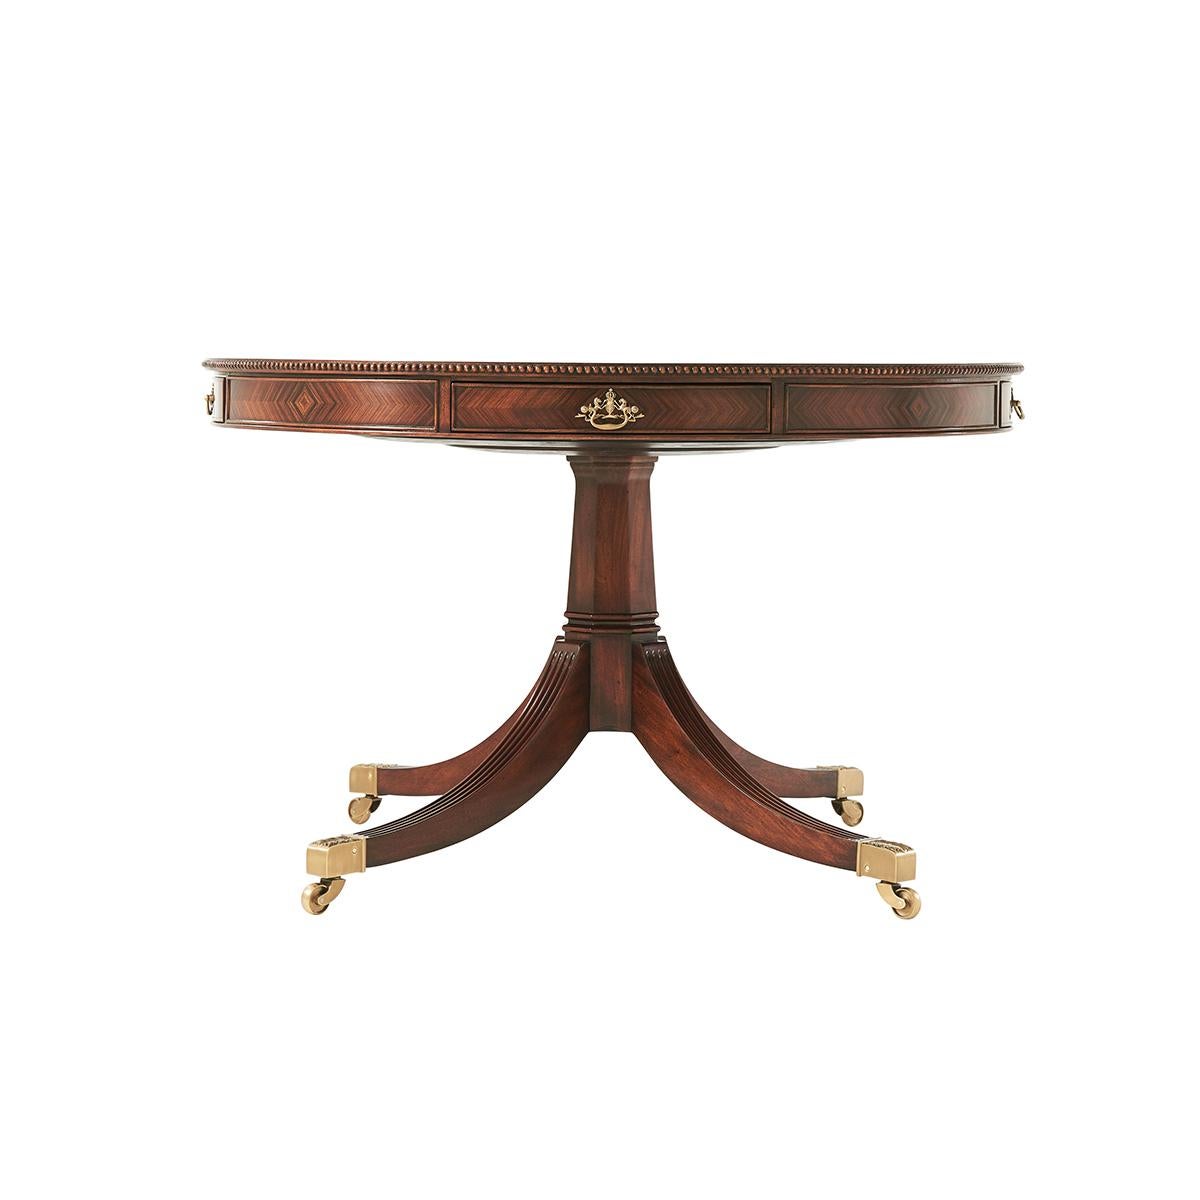 A Regency style morado and pollard banded circular center table, with a carved edge and four frieze drawers with brass handles, the hexagonal column issuing outswept reeded legs on castors. At 30